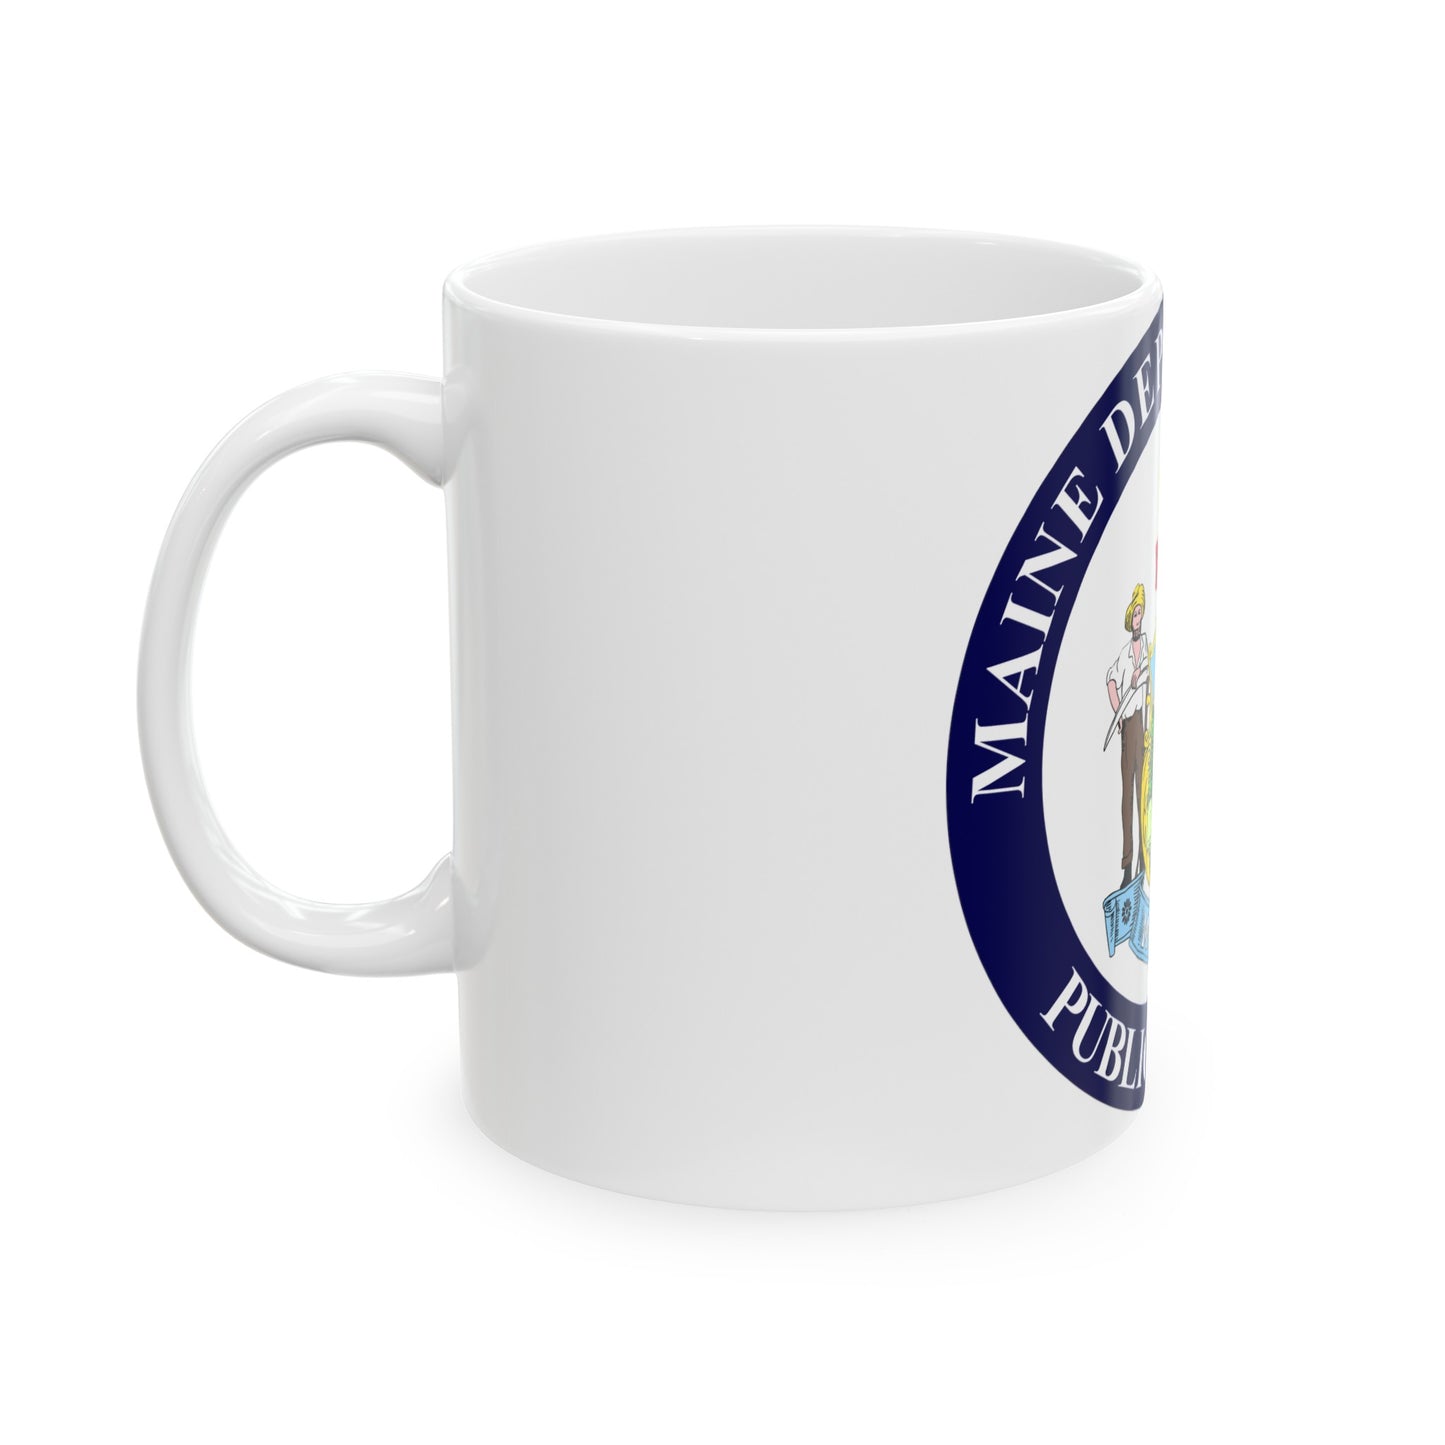 Maine Department of Public Safety - White Coffee Mug